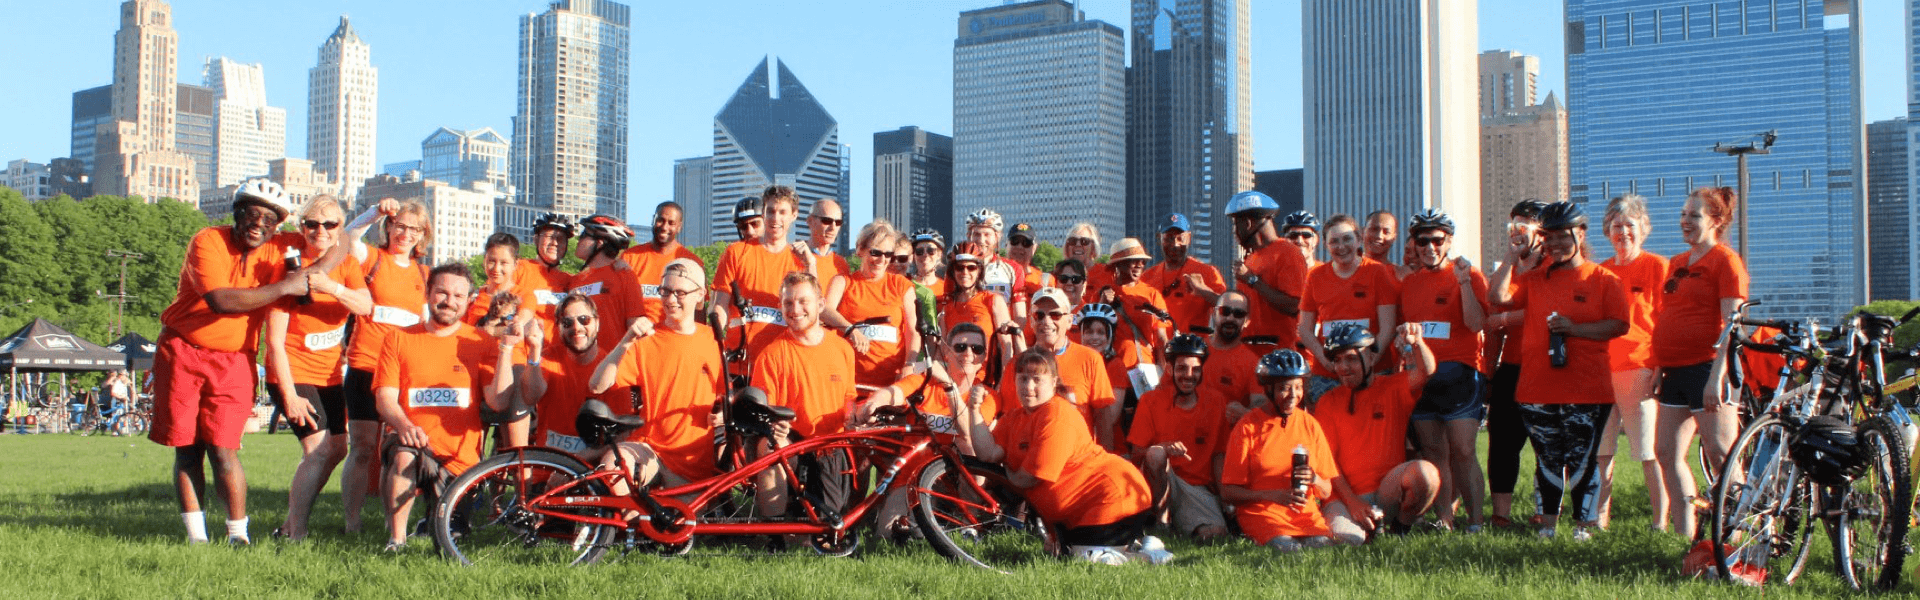 Large group photo outdoors with cityline in the background while wearing orange "Bike the Ride" t-shirts and posing with bikes